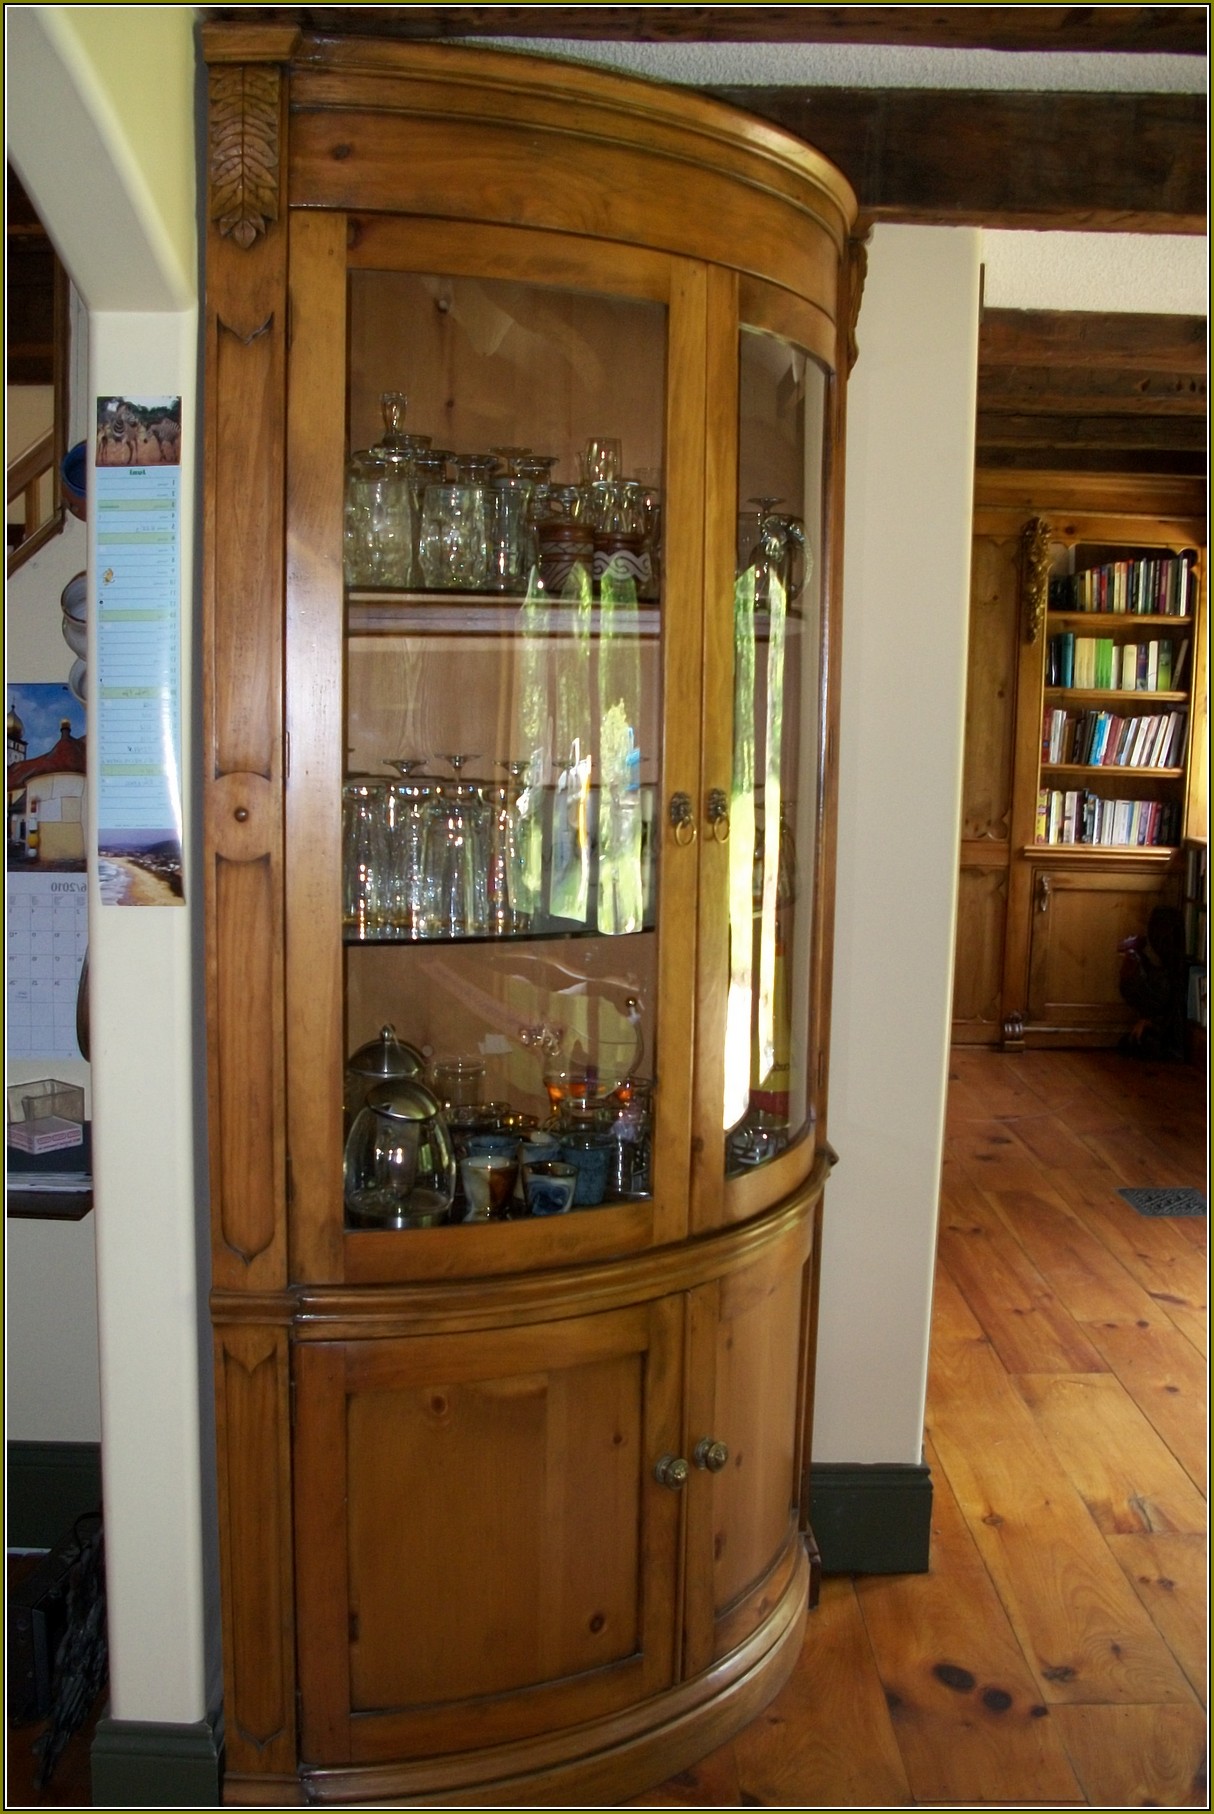 Rounded Glass Curio Cabinet